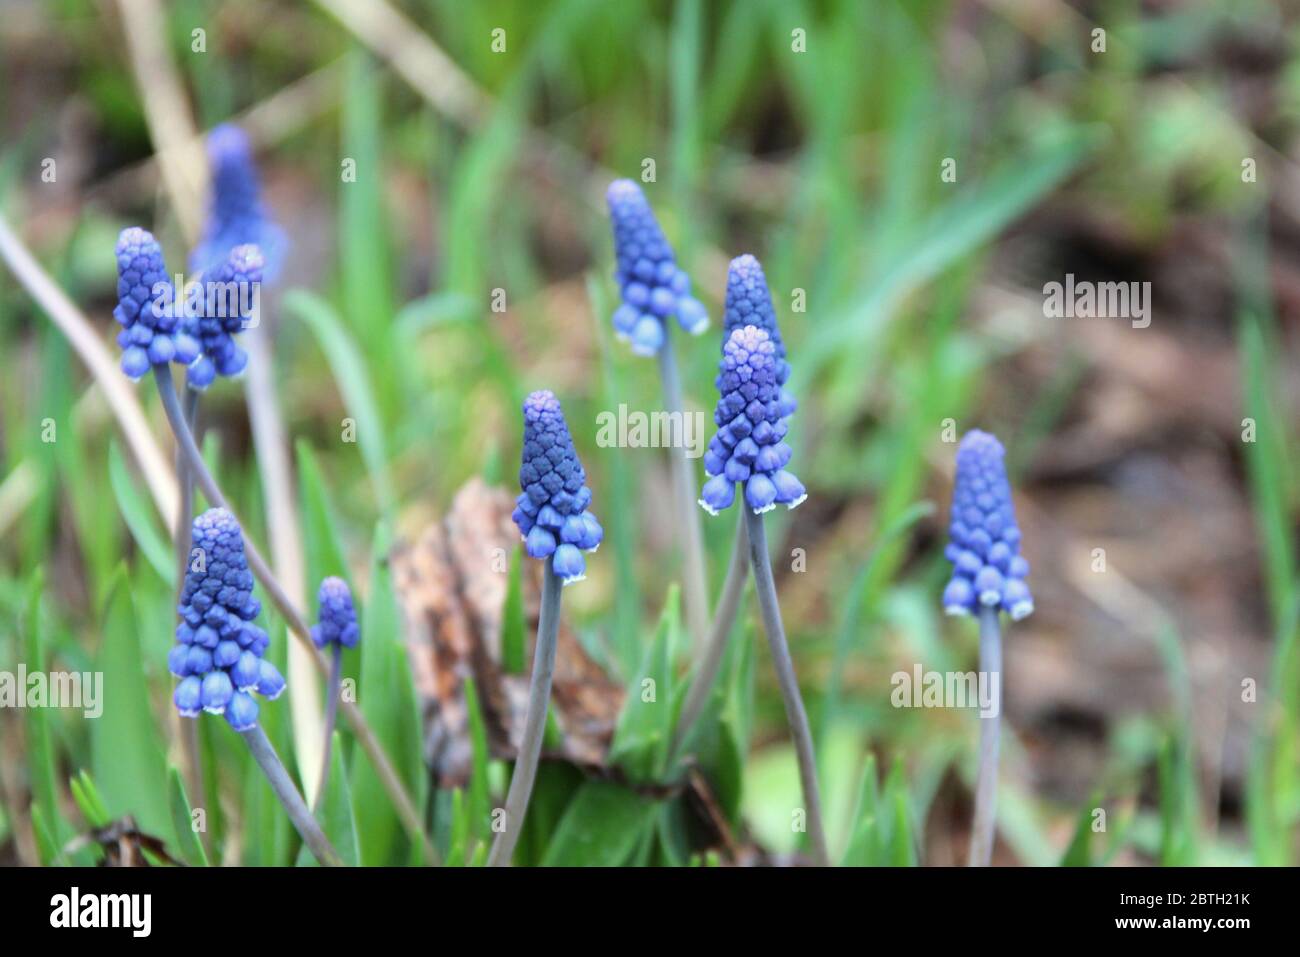 Beautiful white blue blue purple flowers with green leaves grow from black earth among dry foliage in spring. Stock Photo